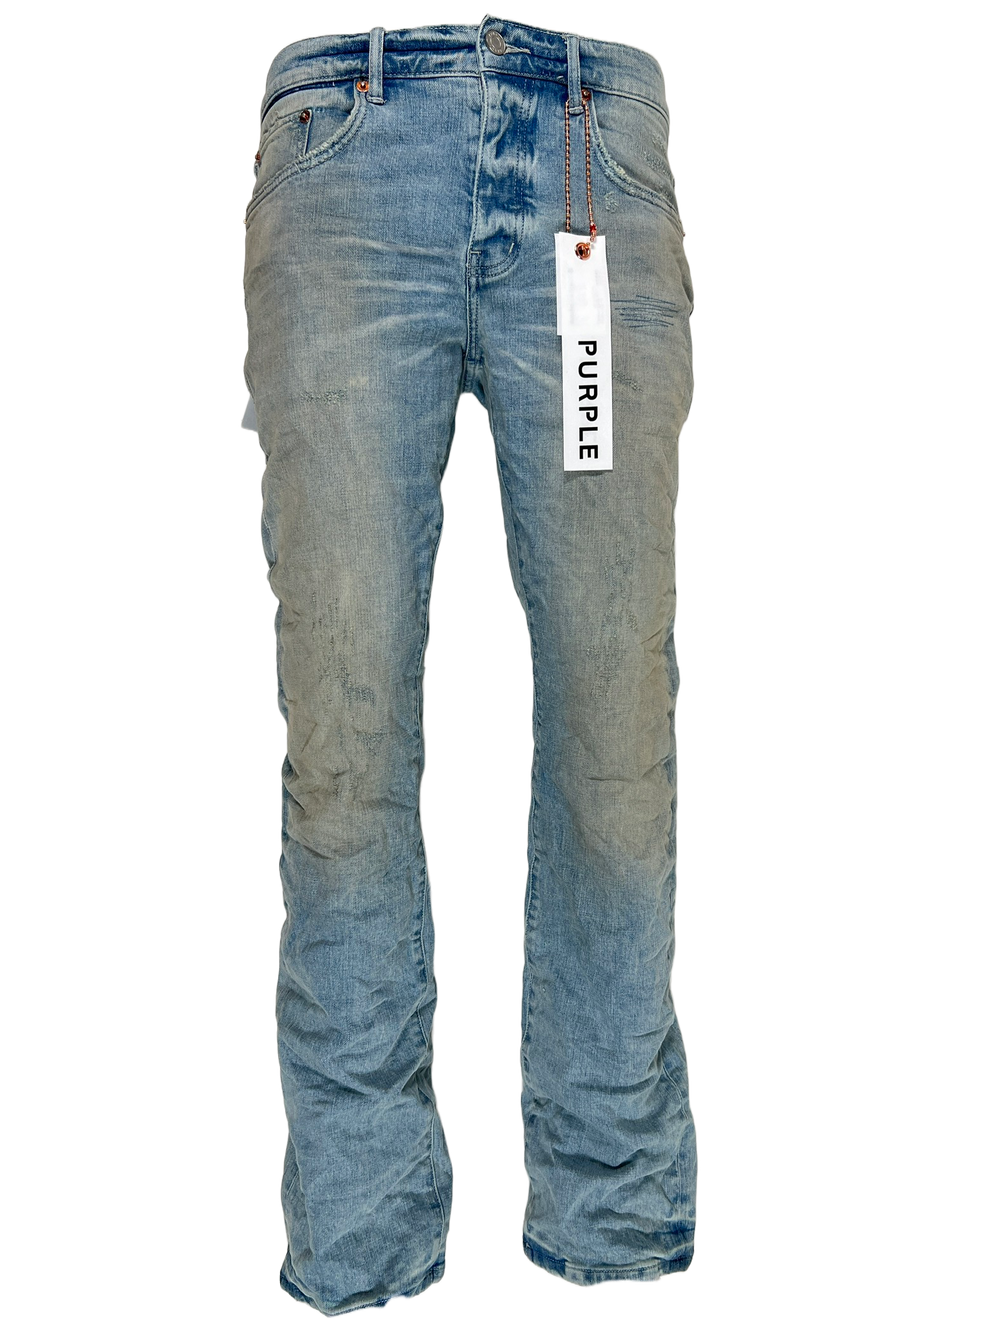 A pair of PURPLE BRAND jeans with a cotton tag on them.